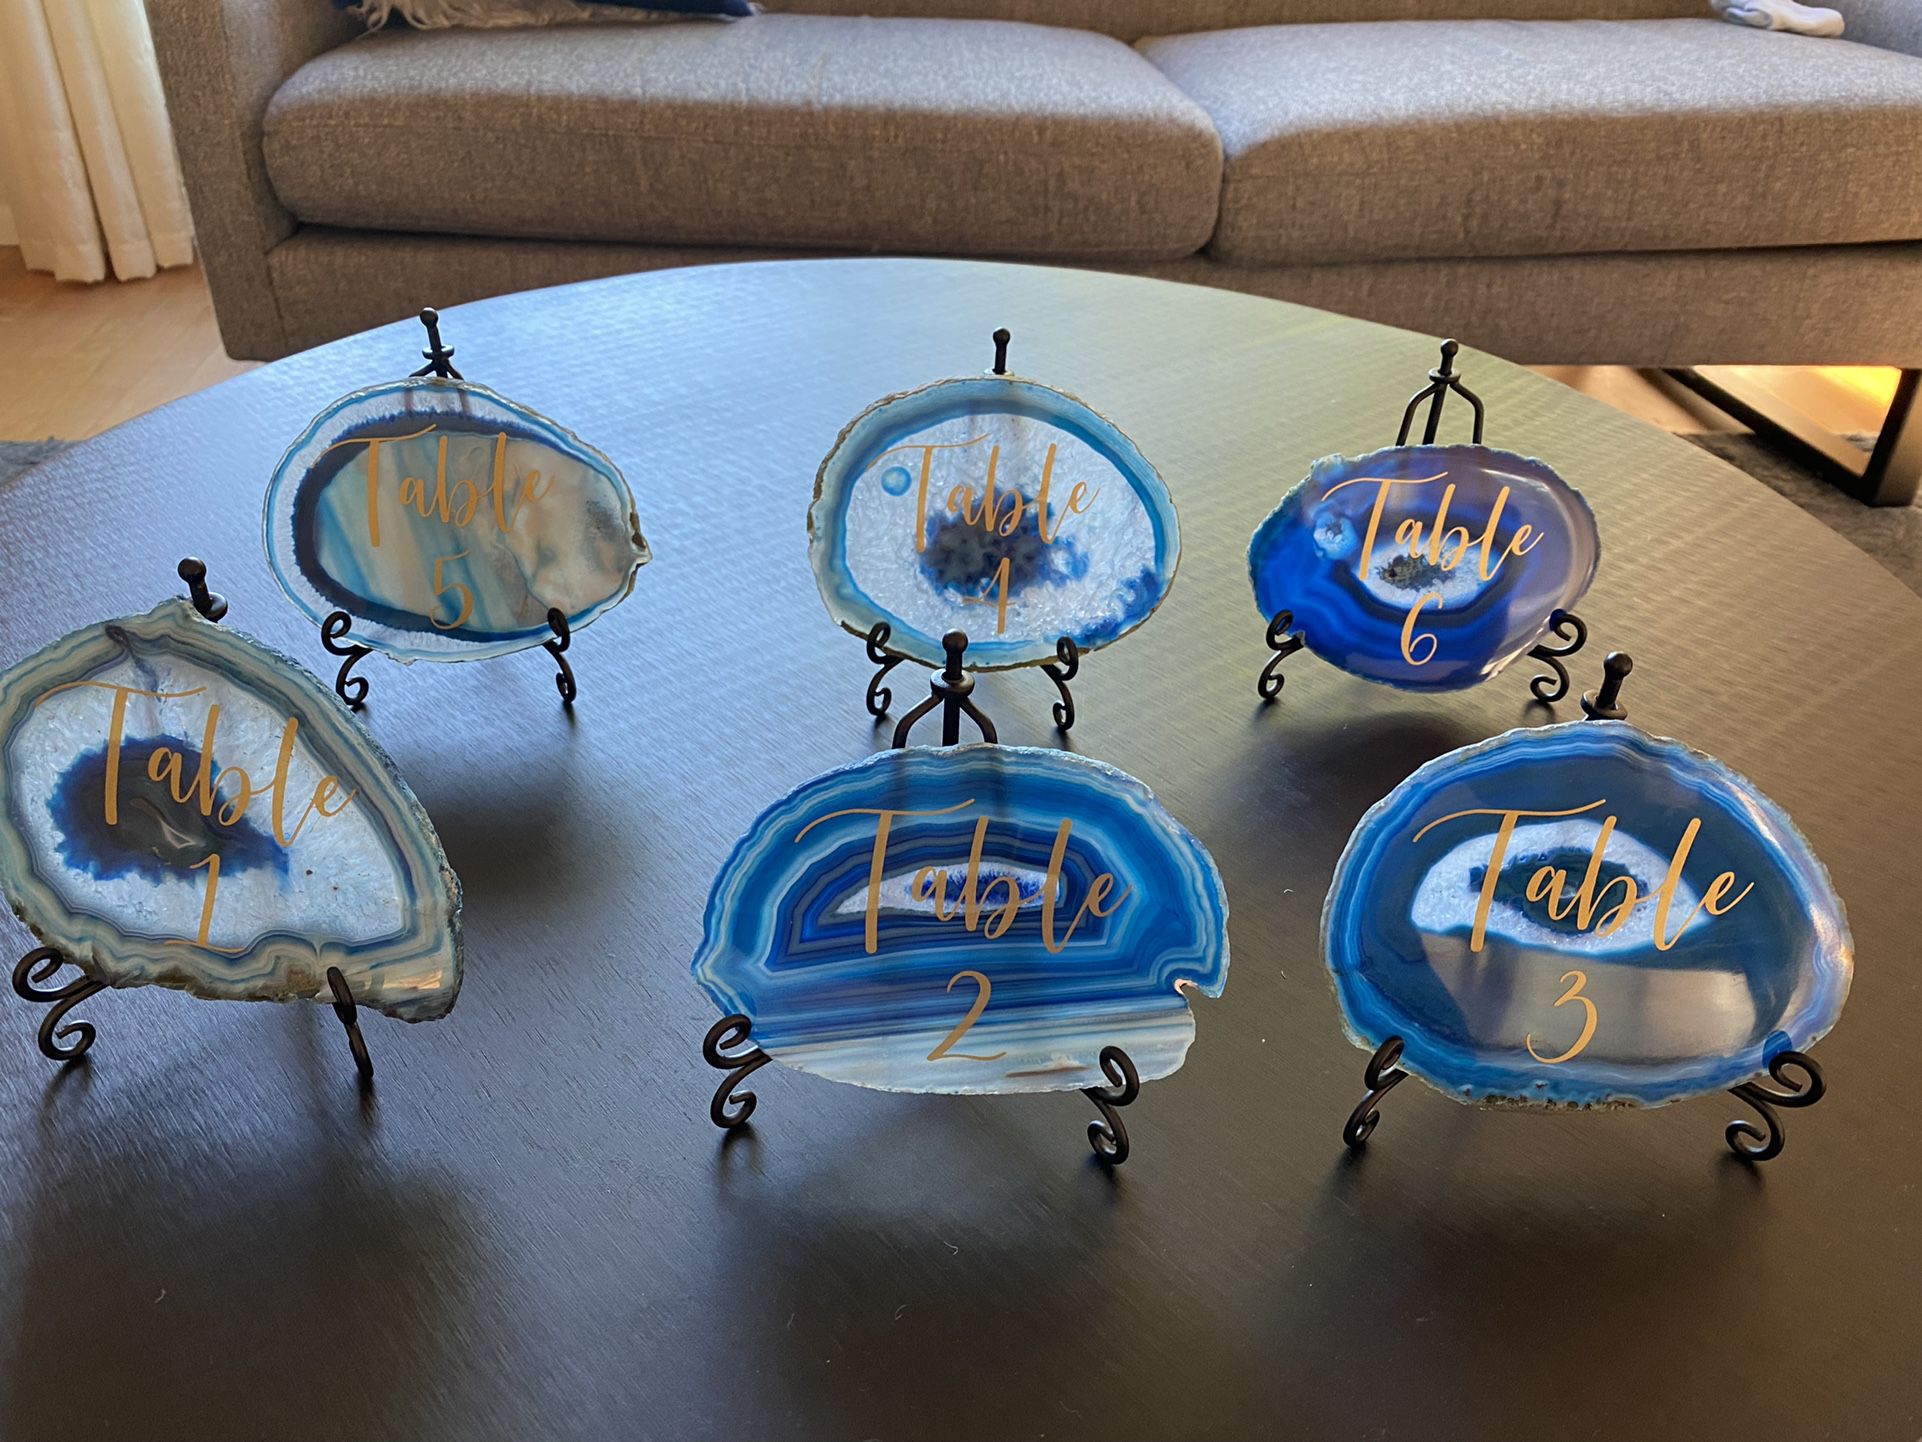 Blue Agate Table Numbers 1-6